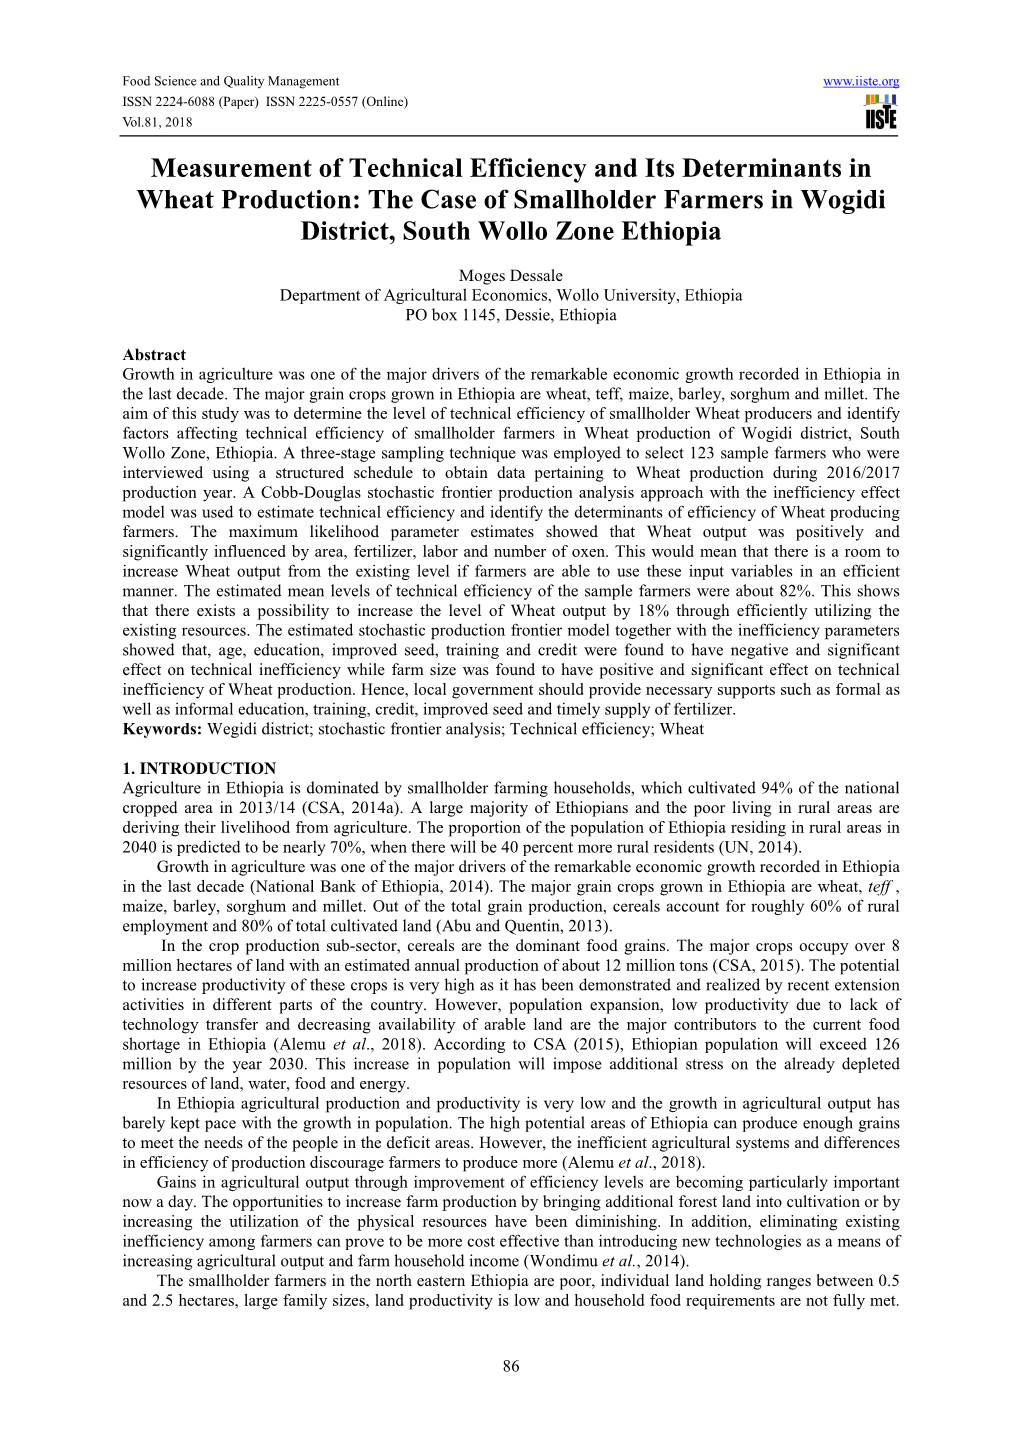 Measurement of Technical Efficiency and Its Determinants in Wheat Production: the Case of Smallholder Farmers in Wogidi District, South Wollo Zone Ethiopia